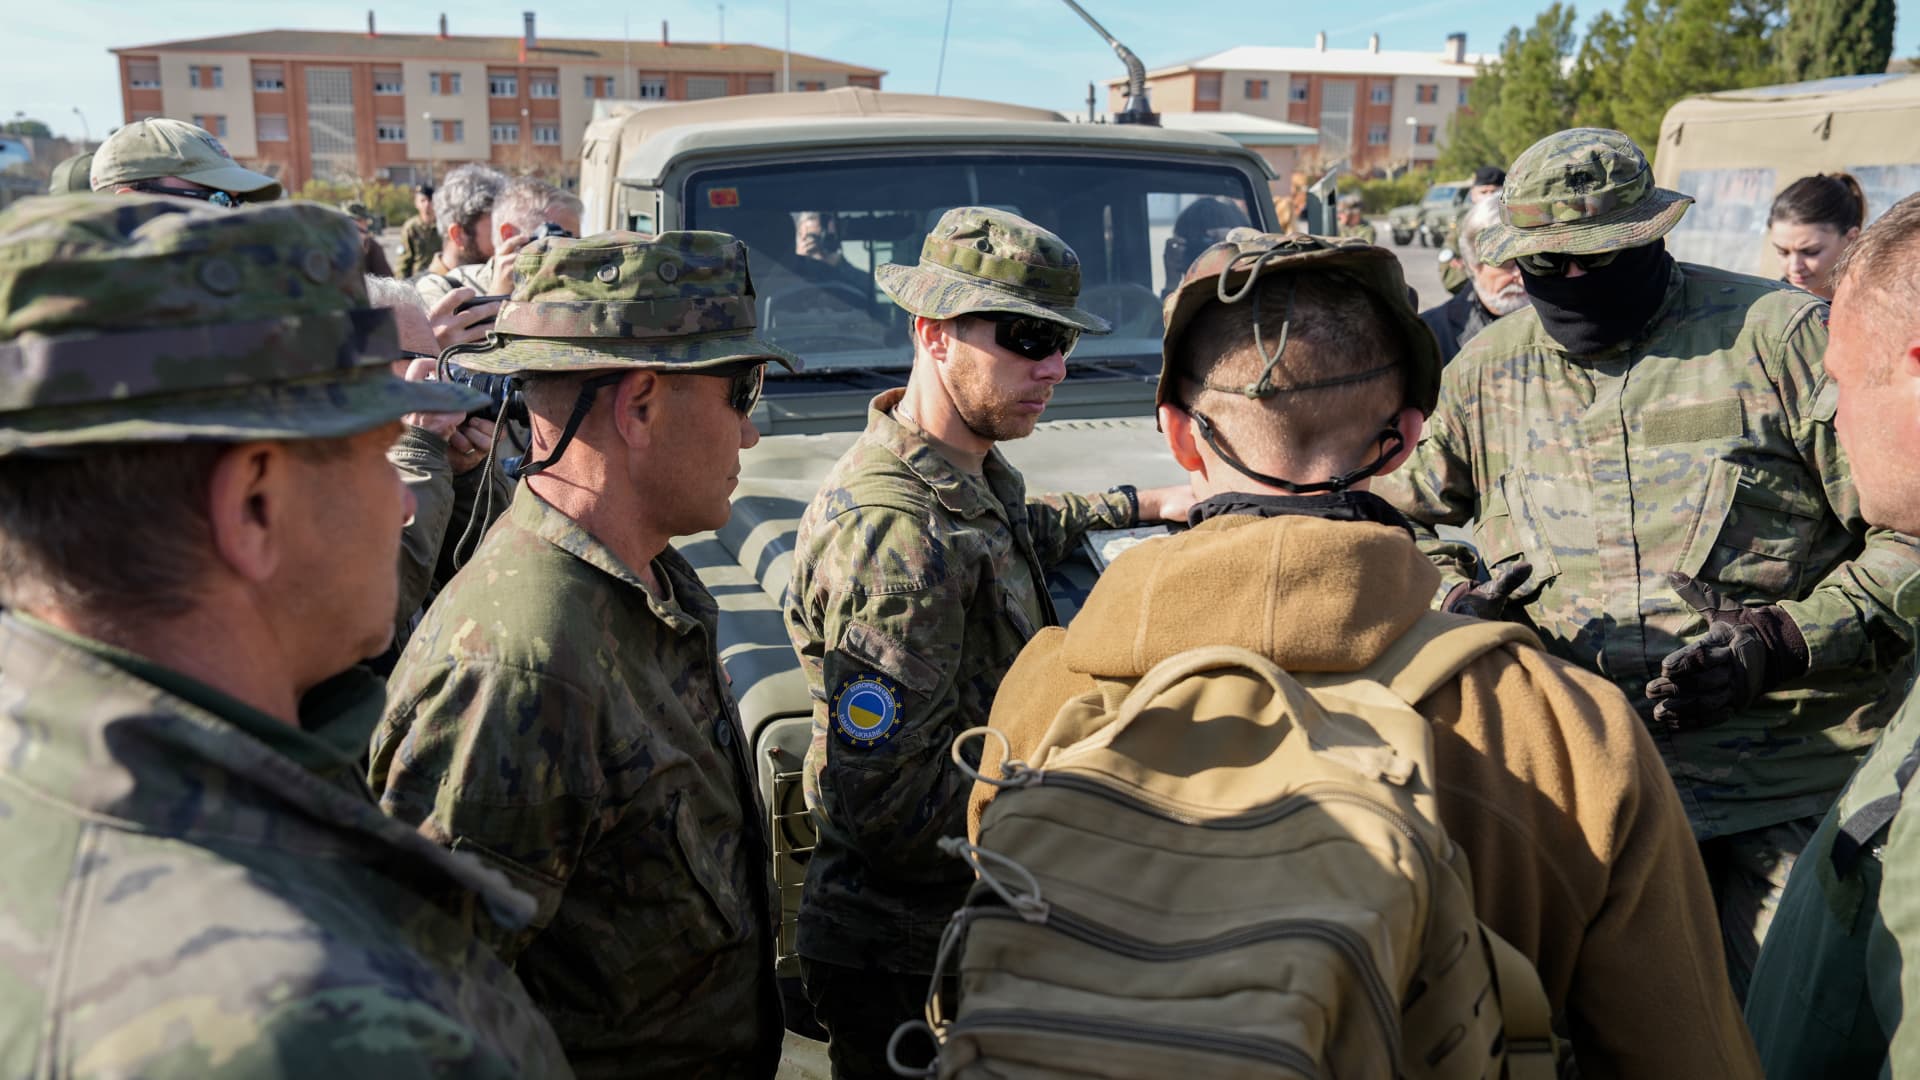 Ukrainian military personnel listen to a briefing ahead of a Leopard 2A4 tank training exercise conducted by the Spanish military, at the San Gregorio military base outside Zaragoza, Spain, on Monday, March 13, 2023. 